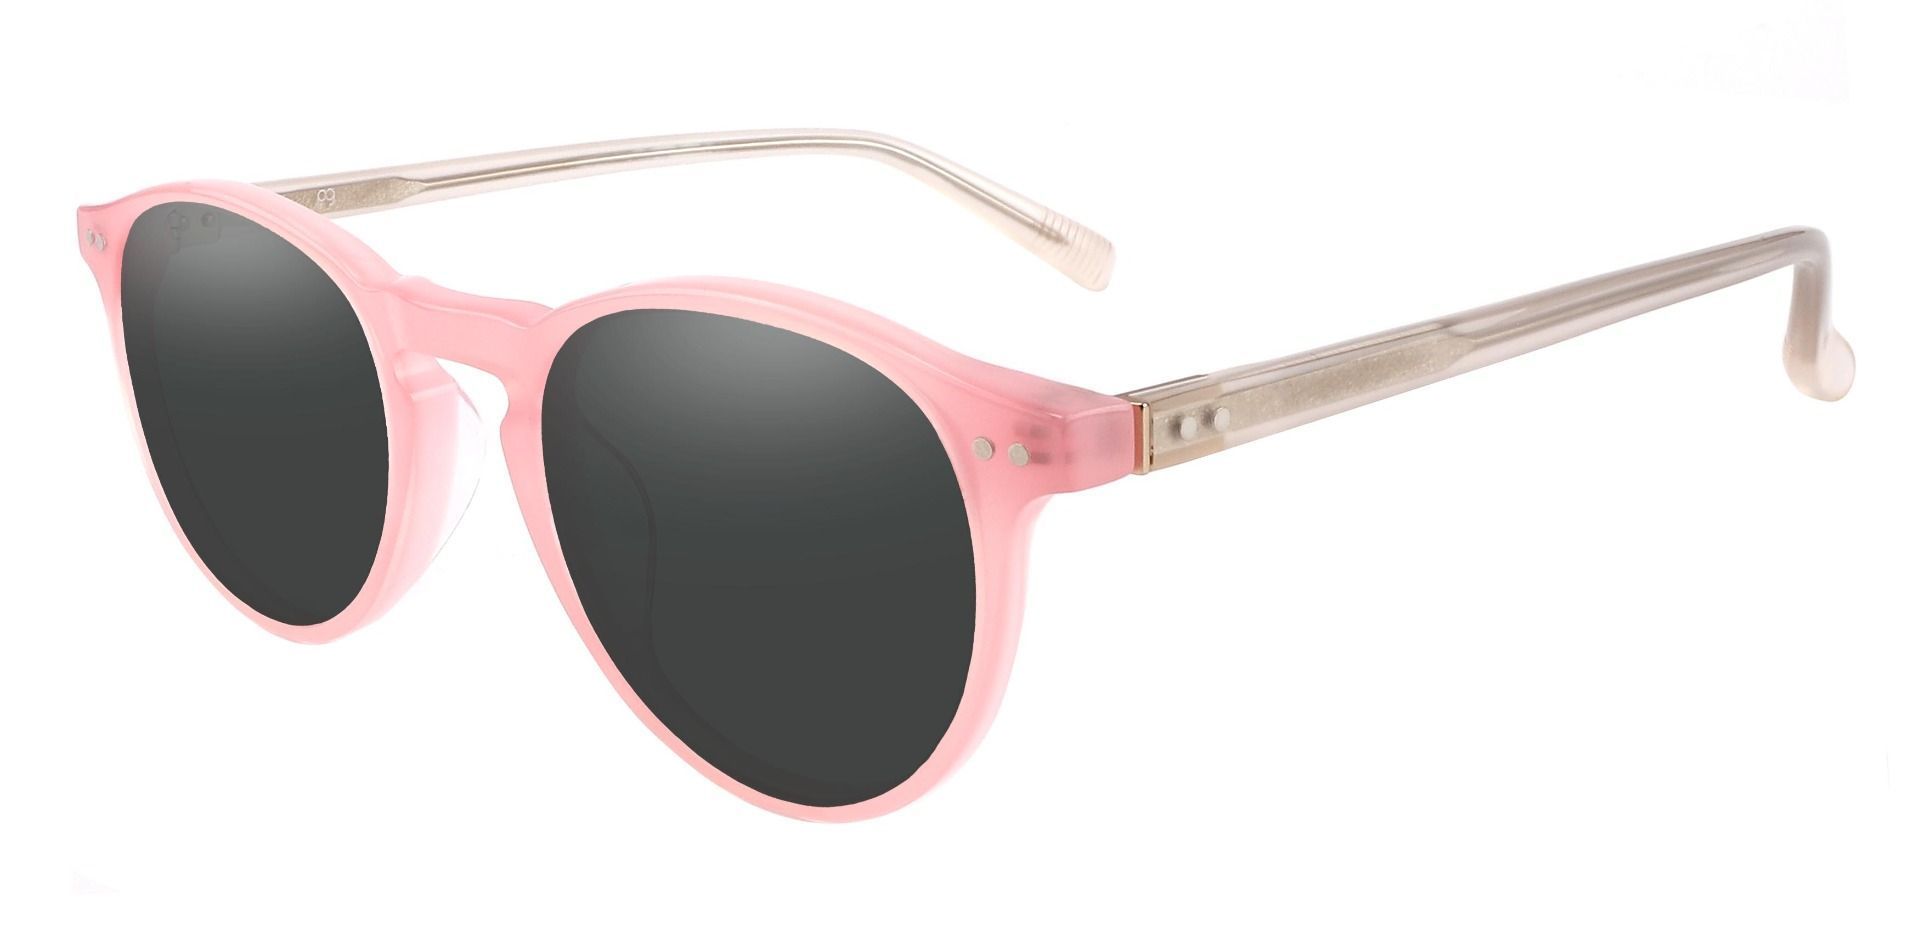 Monarch Oval Non-Rx Sunglasses - Pink Frame With Gray Lenses